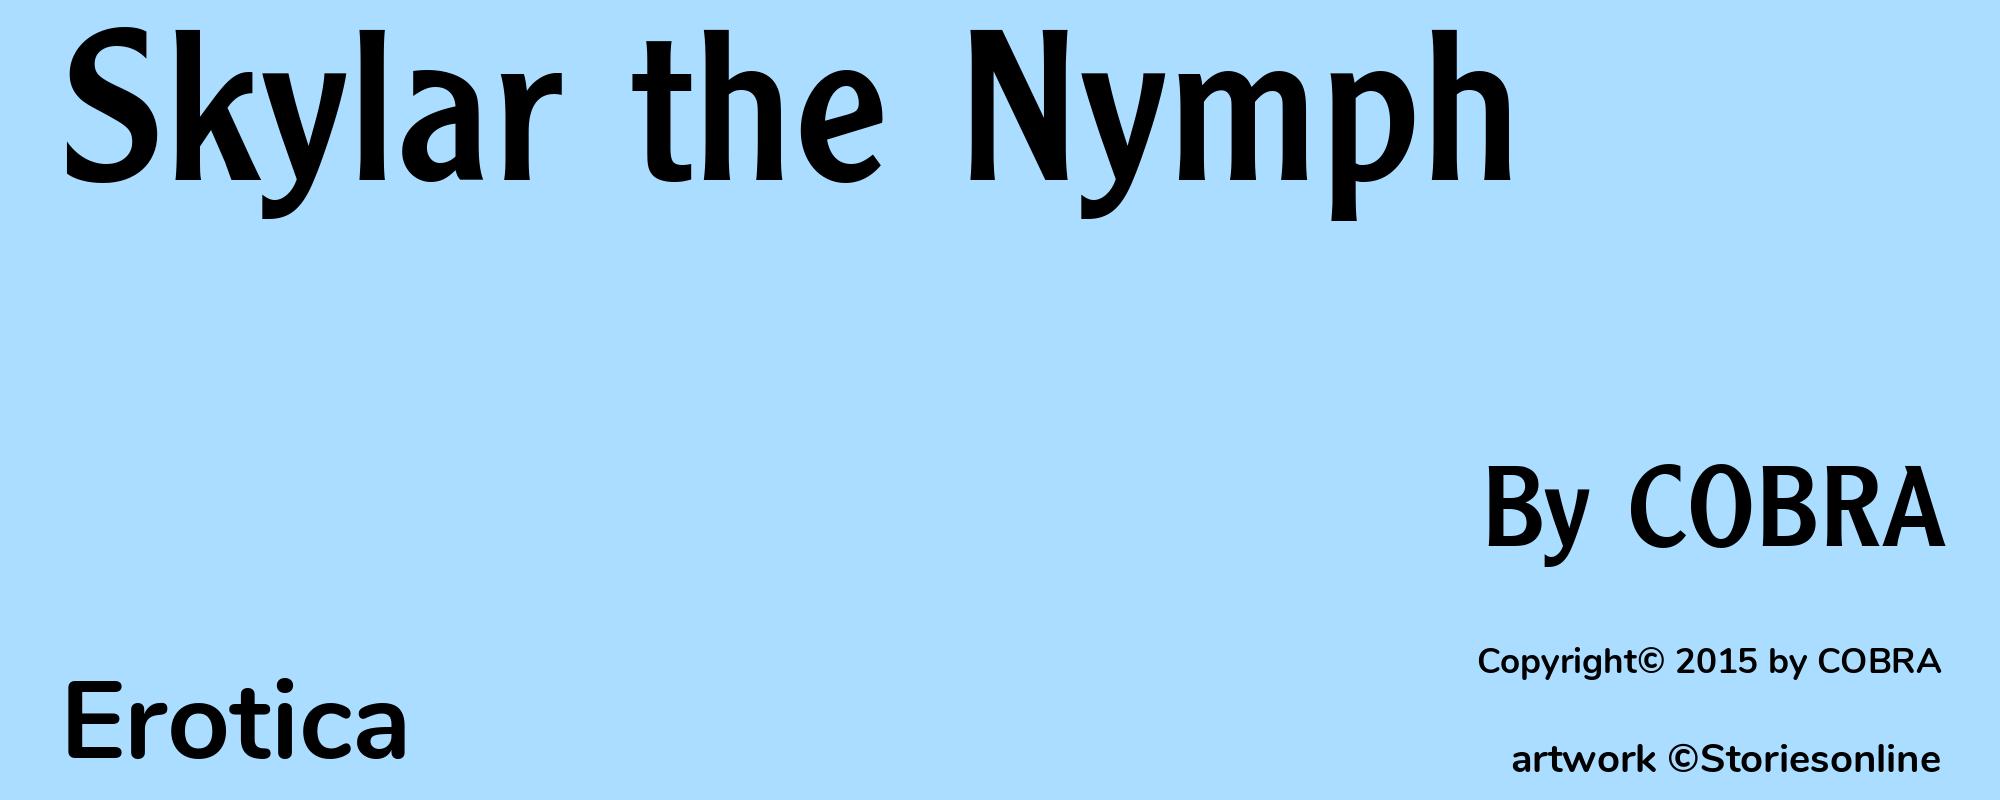 Skylar the Nymph - Cover